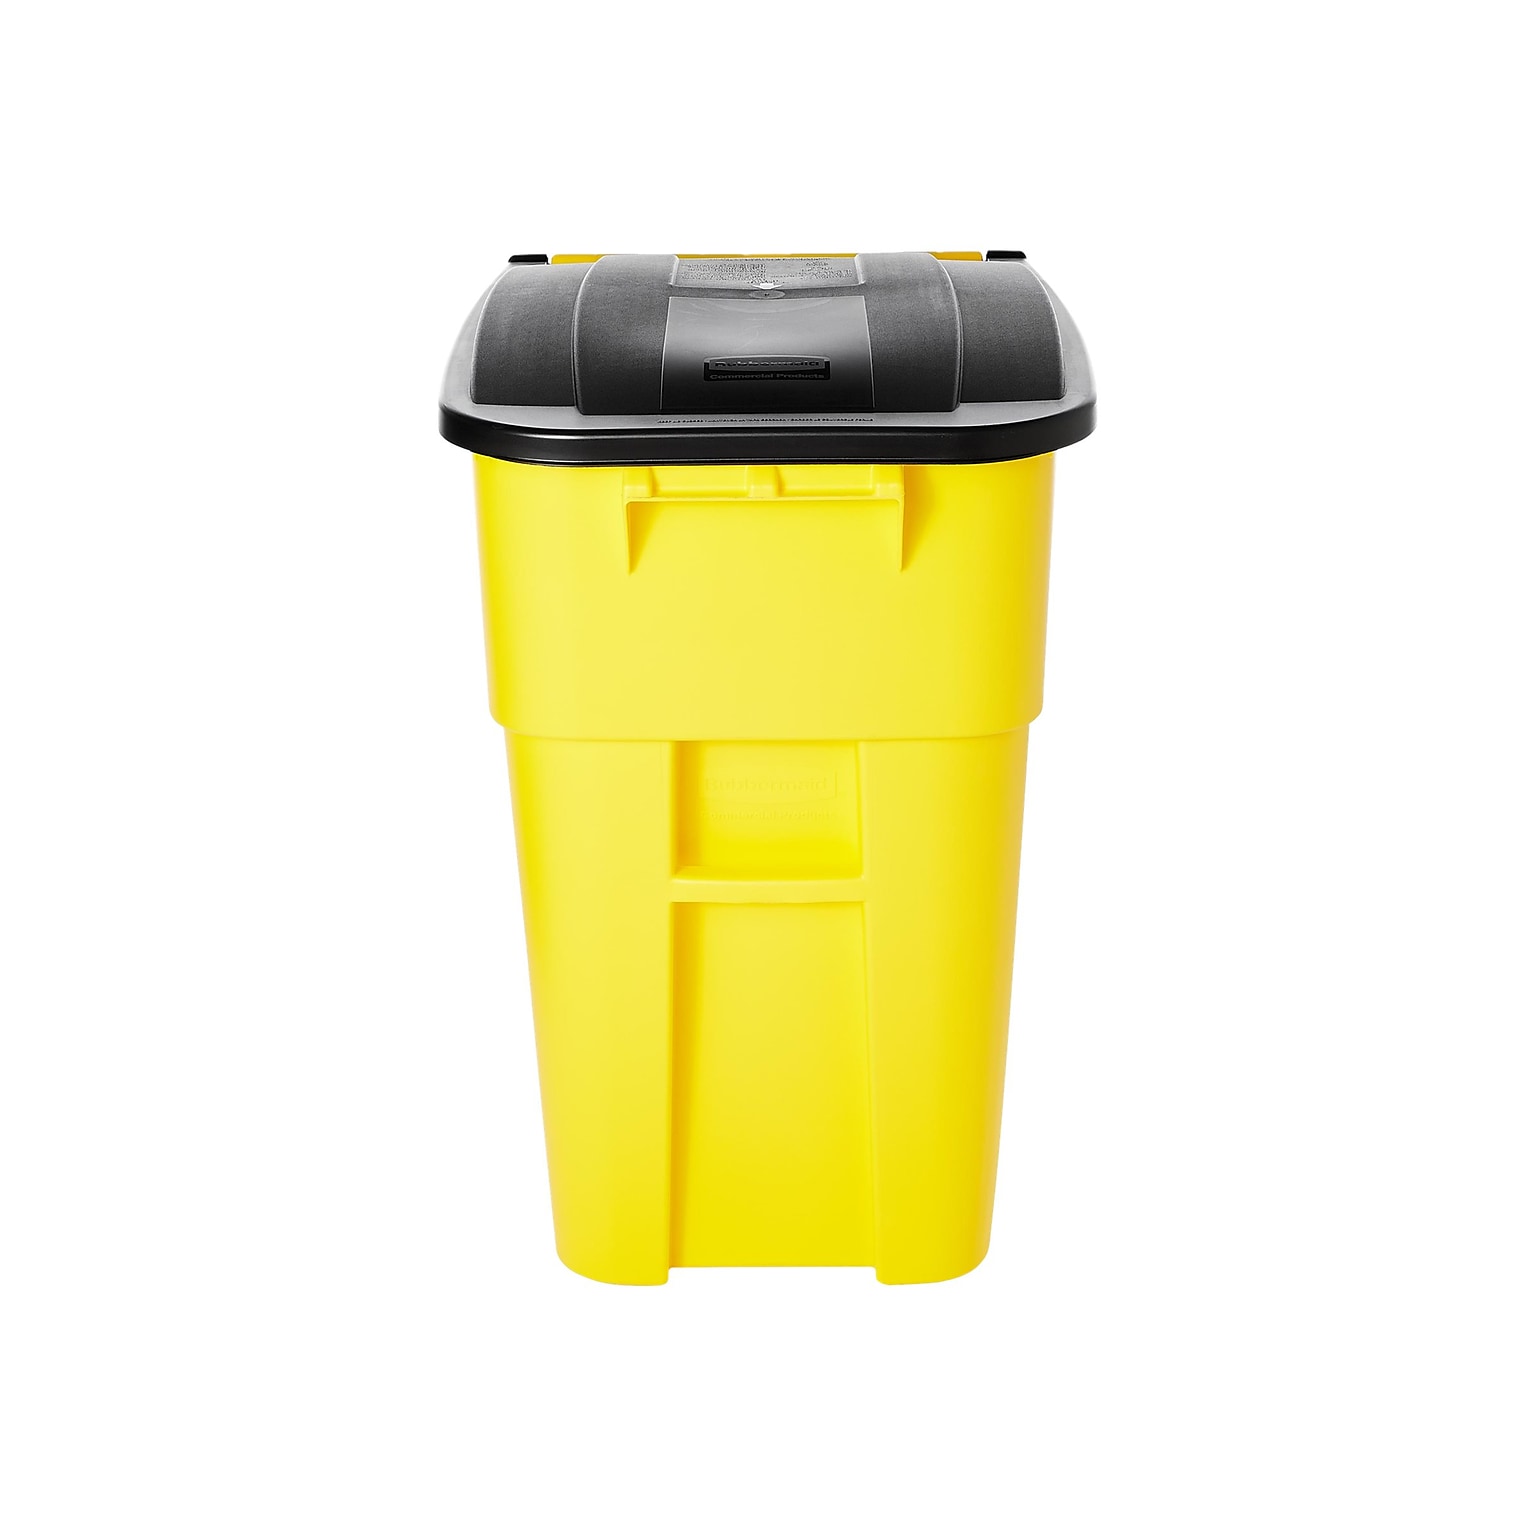 Rubbermaid BRUTE Rollout Outdoor Trash Can with Lid, Yellow Plastic, 50 Gal. (FG9W2700YEL)